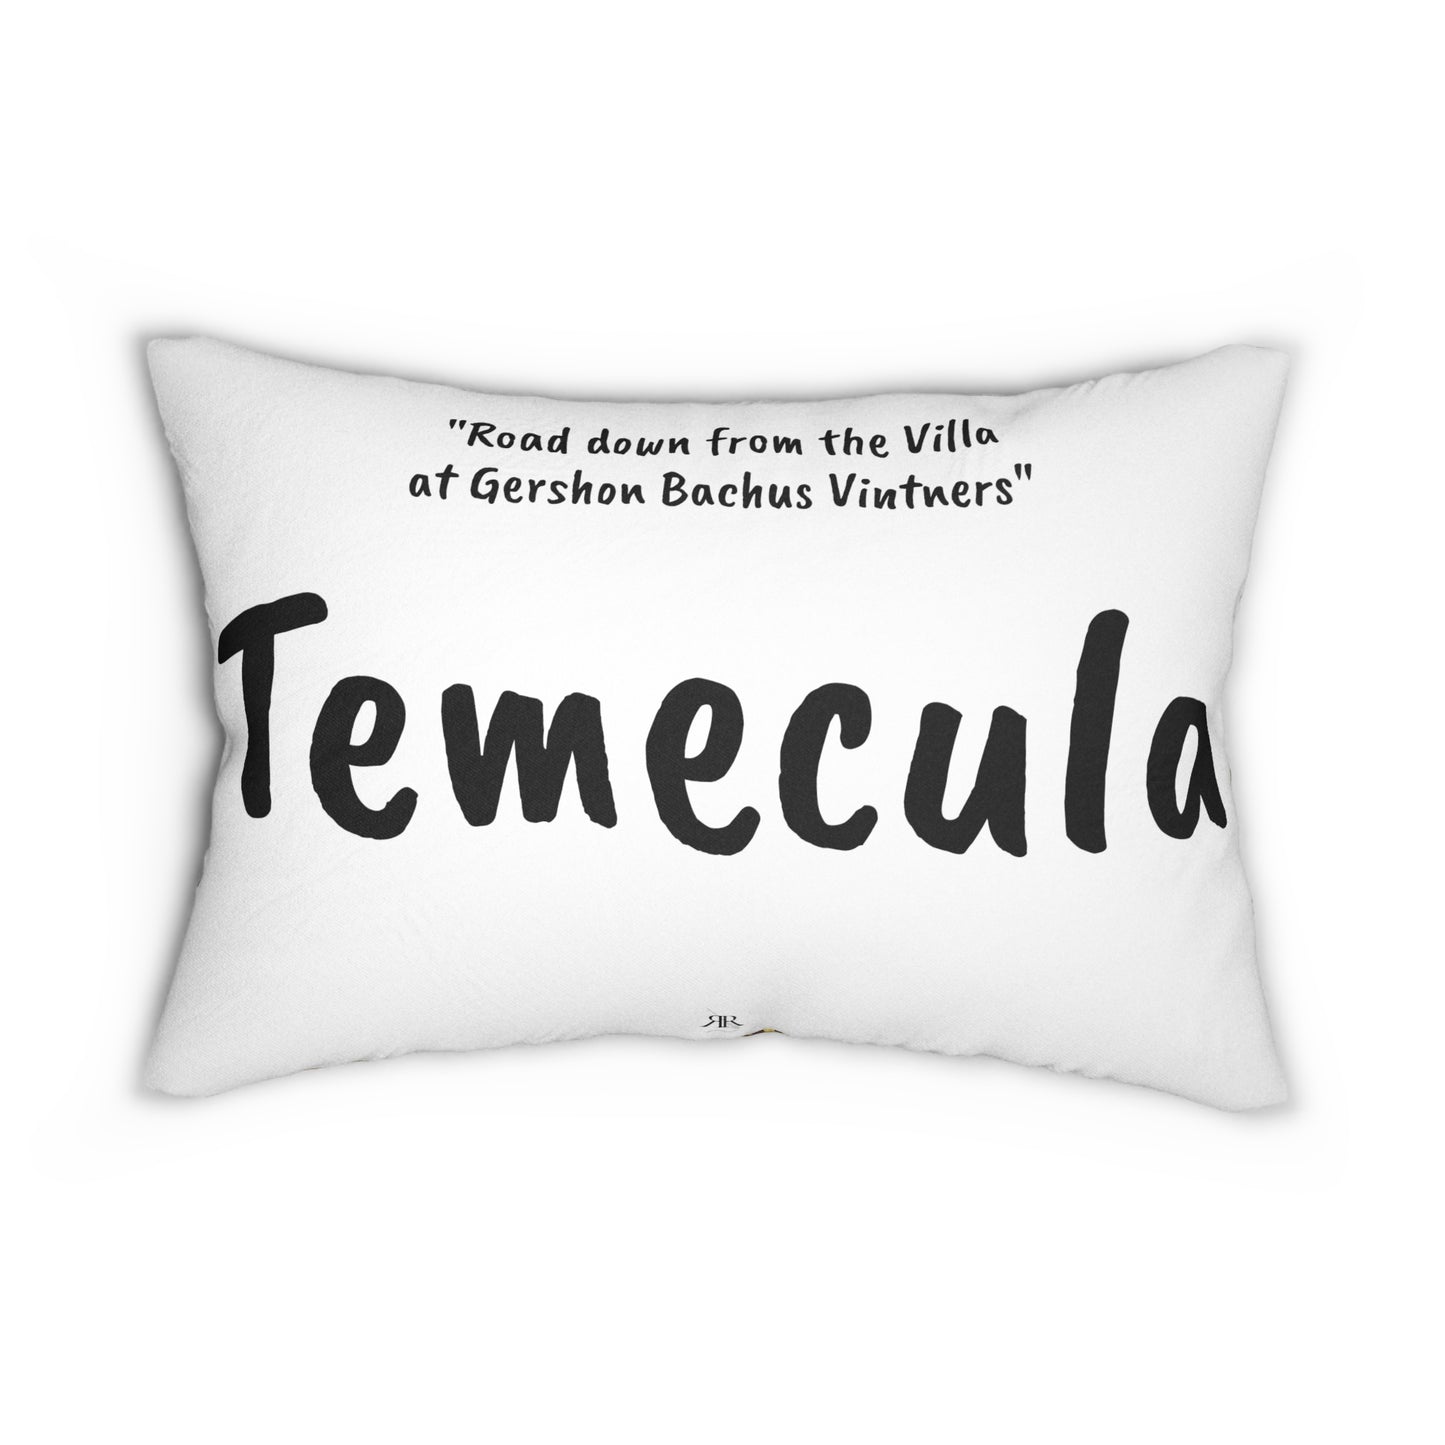 Temecula Lumbar Pillow featuring "Road down from the Villa at Gershon Bachus Vintners" painting and "Temecula"